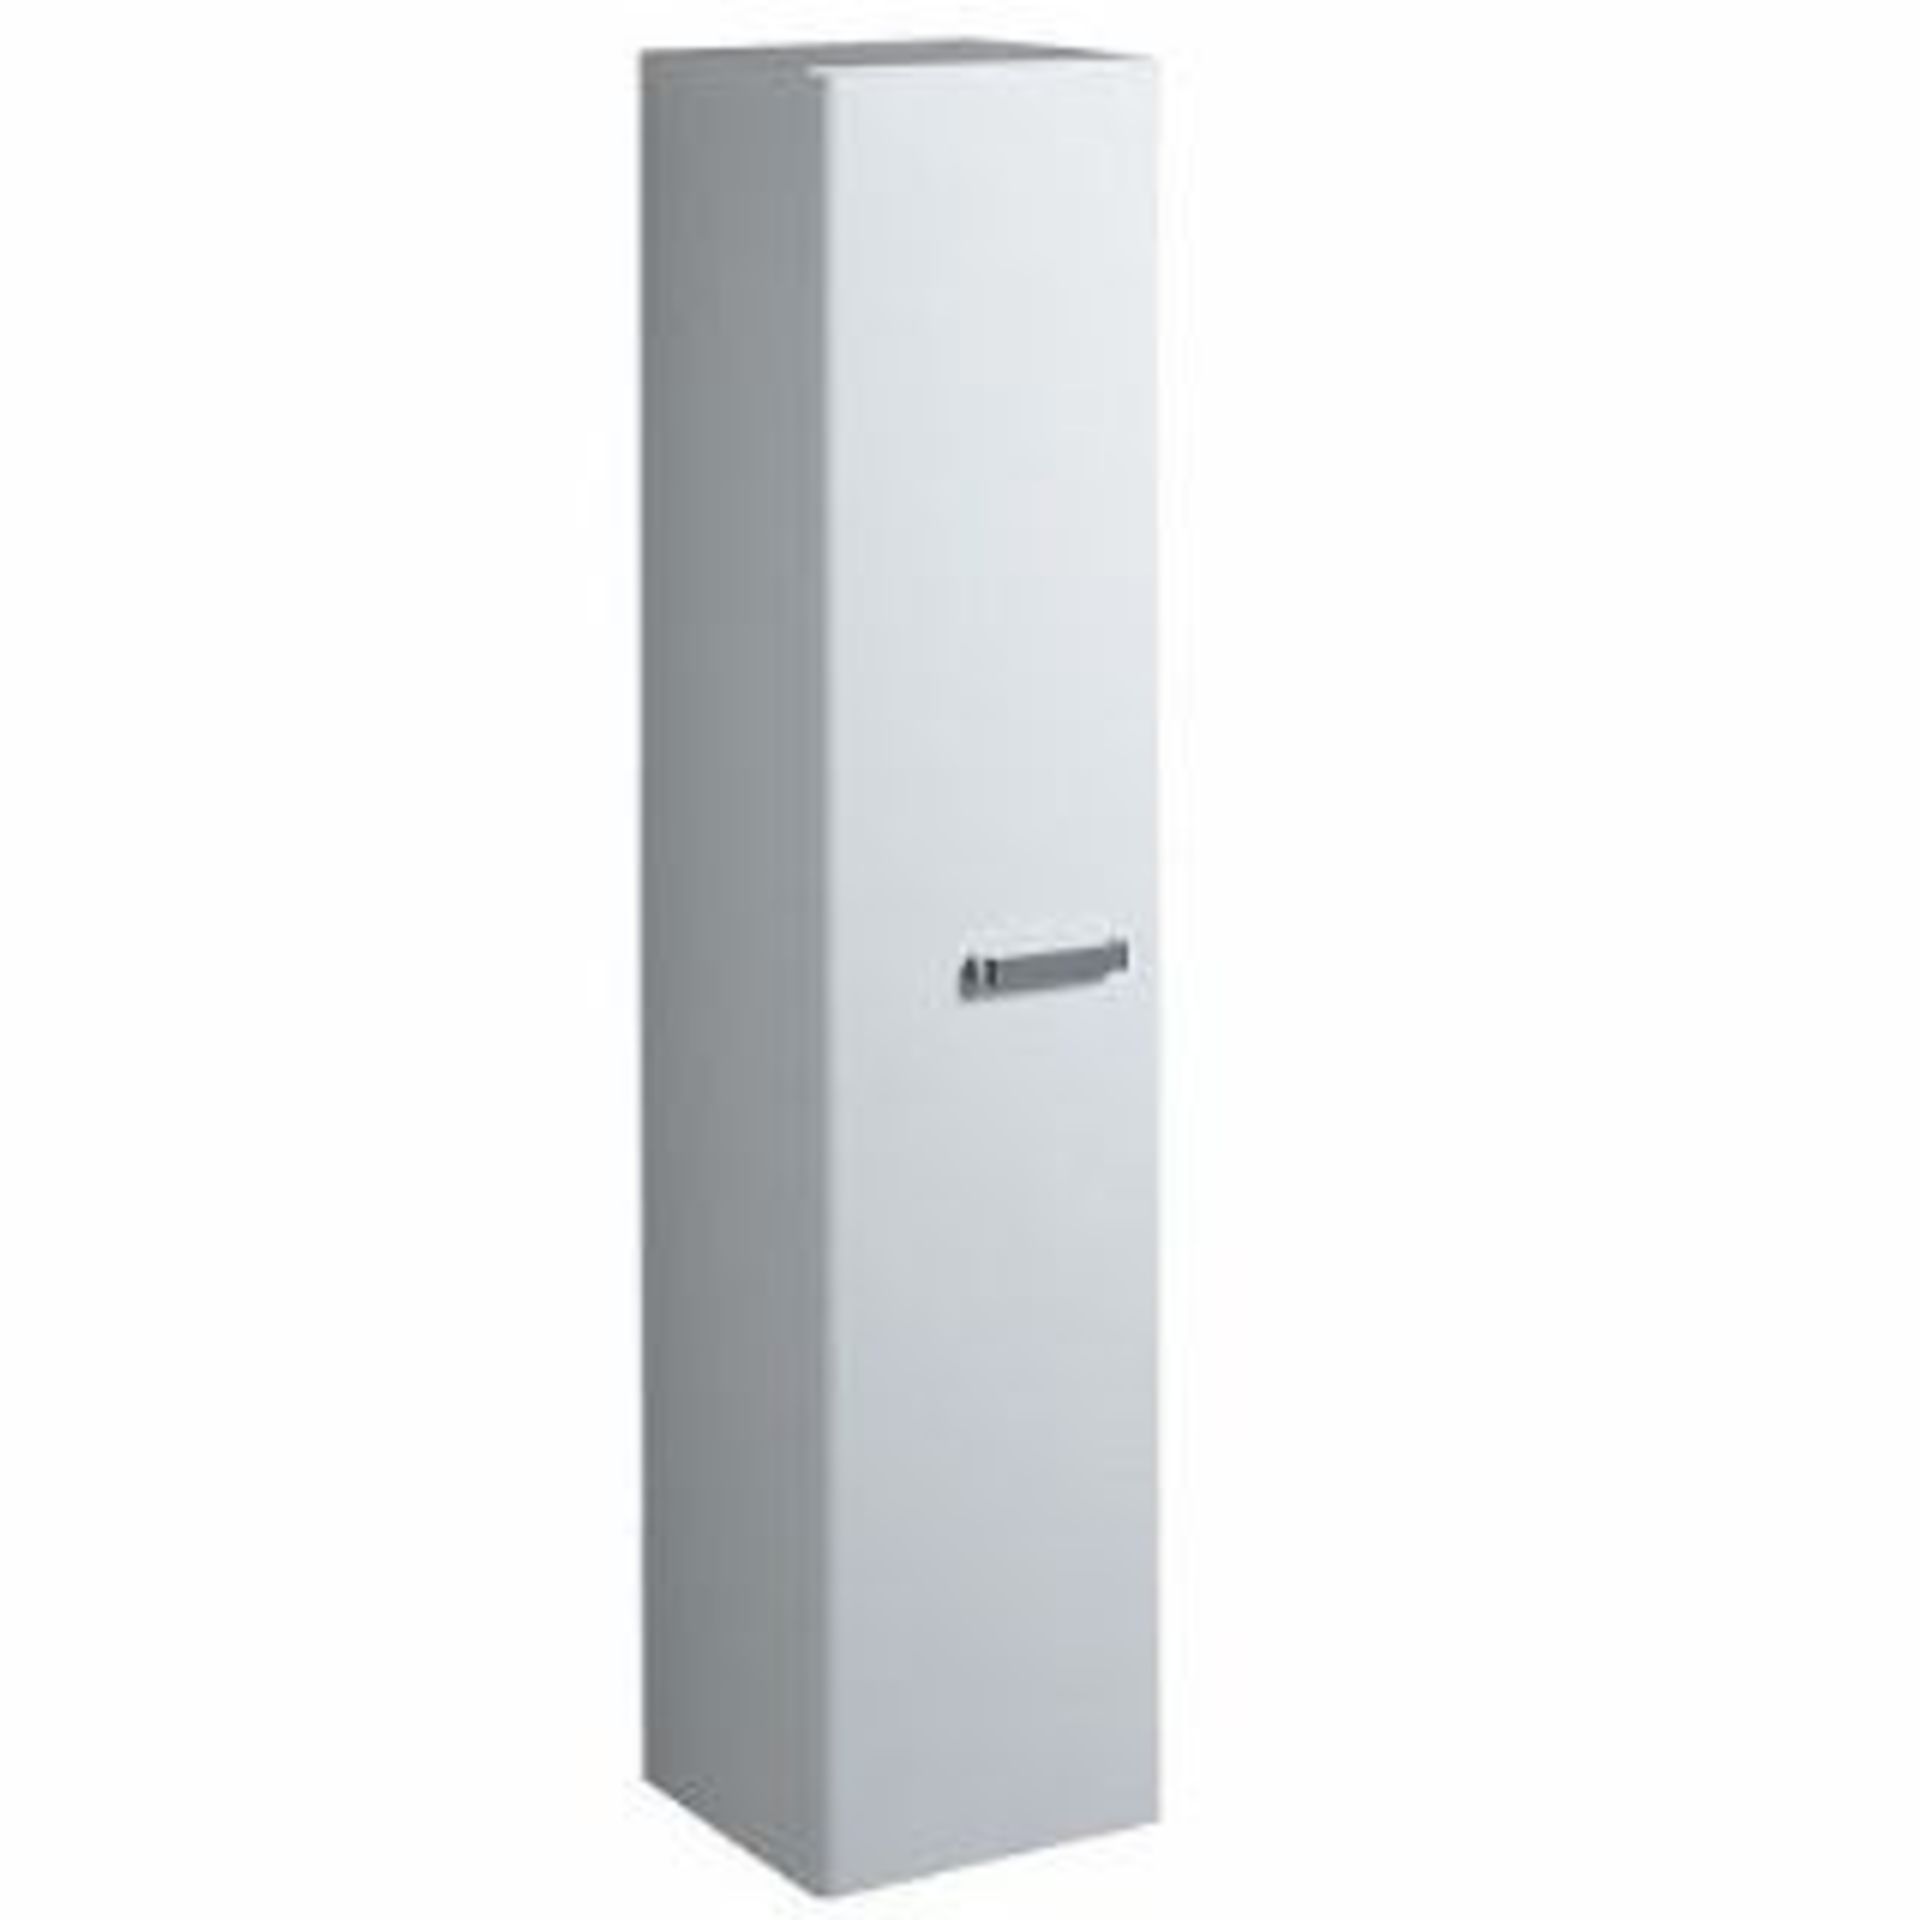 Brand New (QL62) Twyford 1730mm White Tall Furniture Unit. RRP £863.99.White gloss finish Wall mount